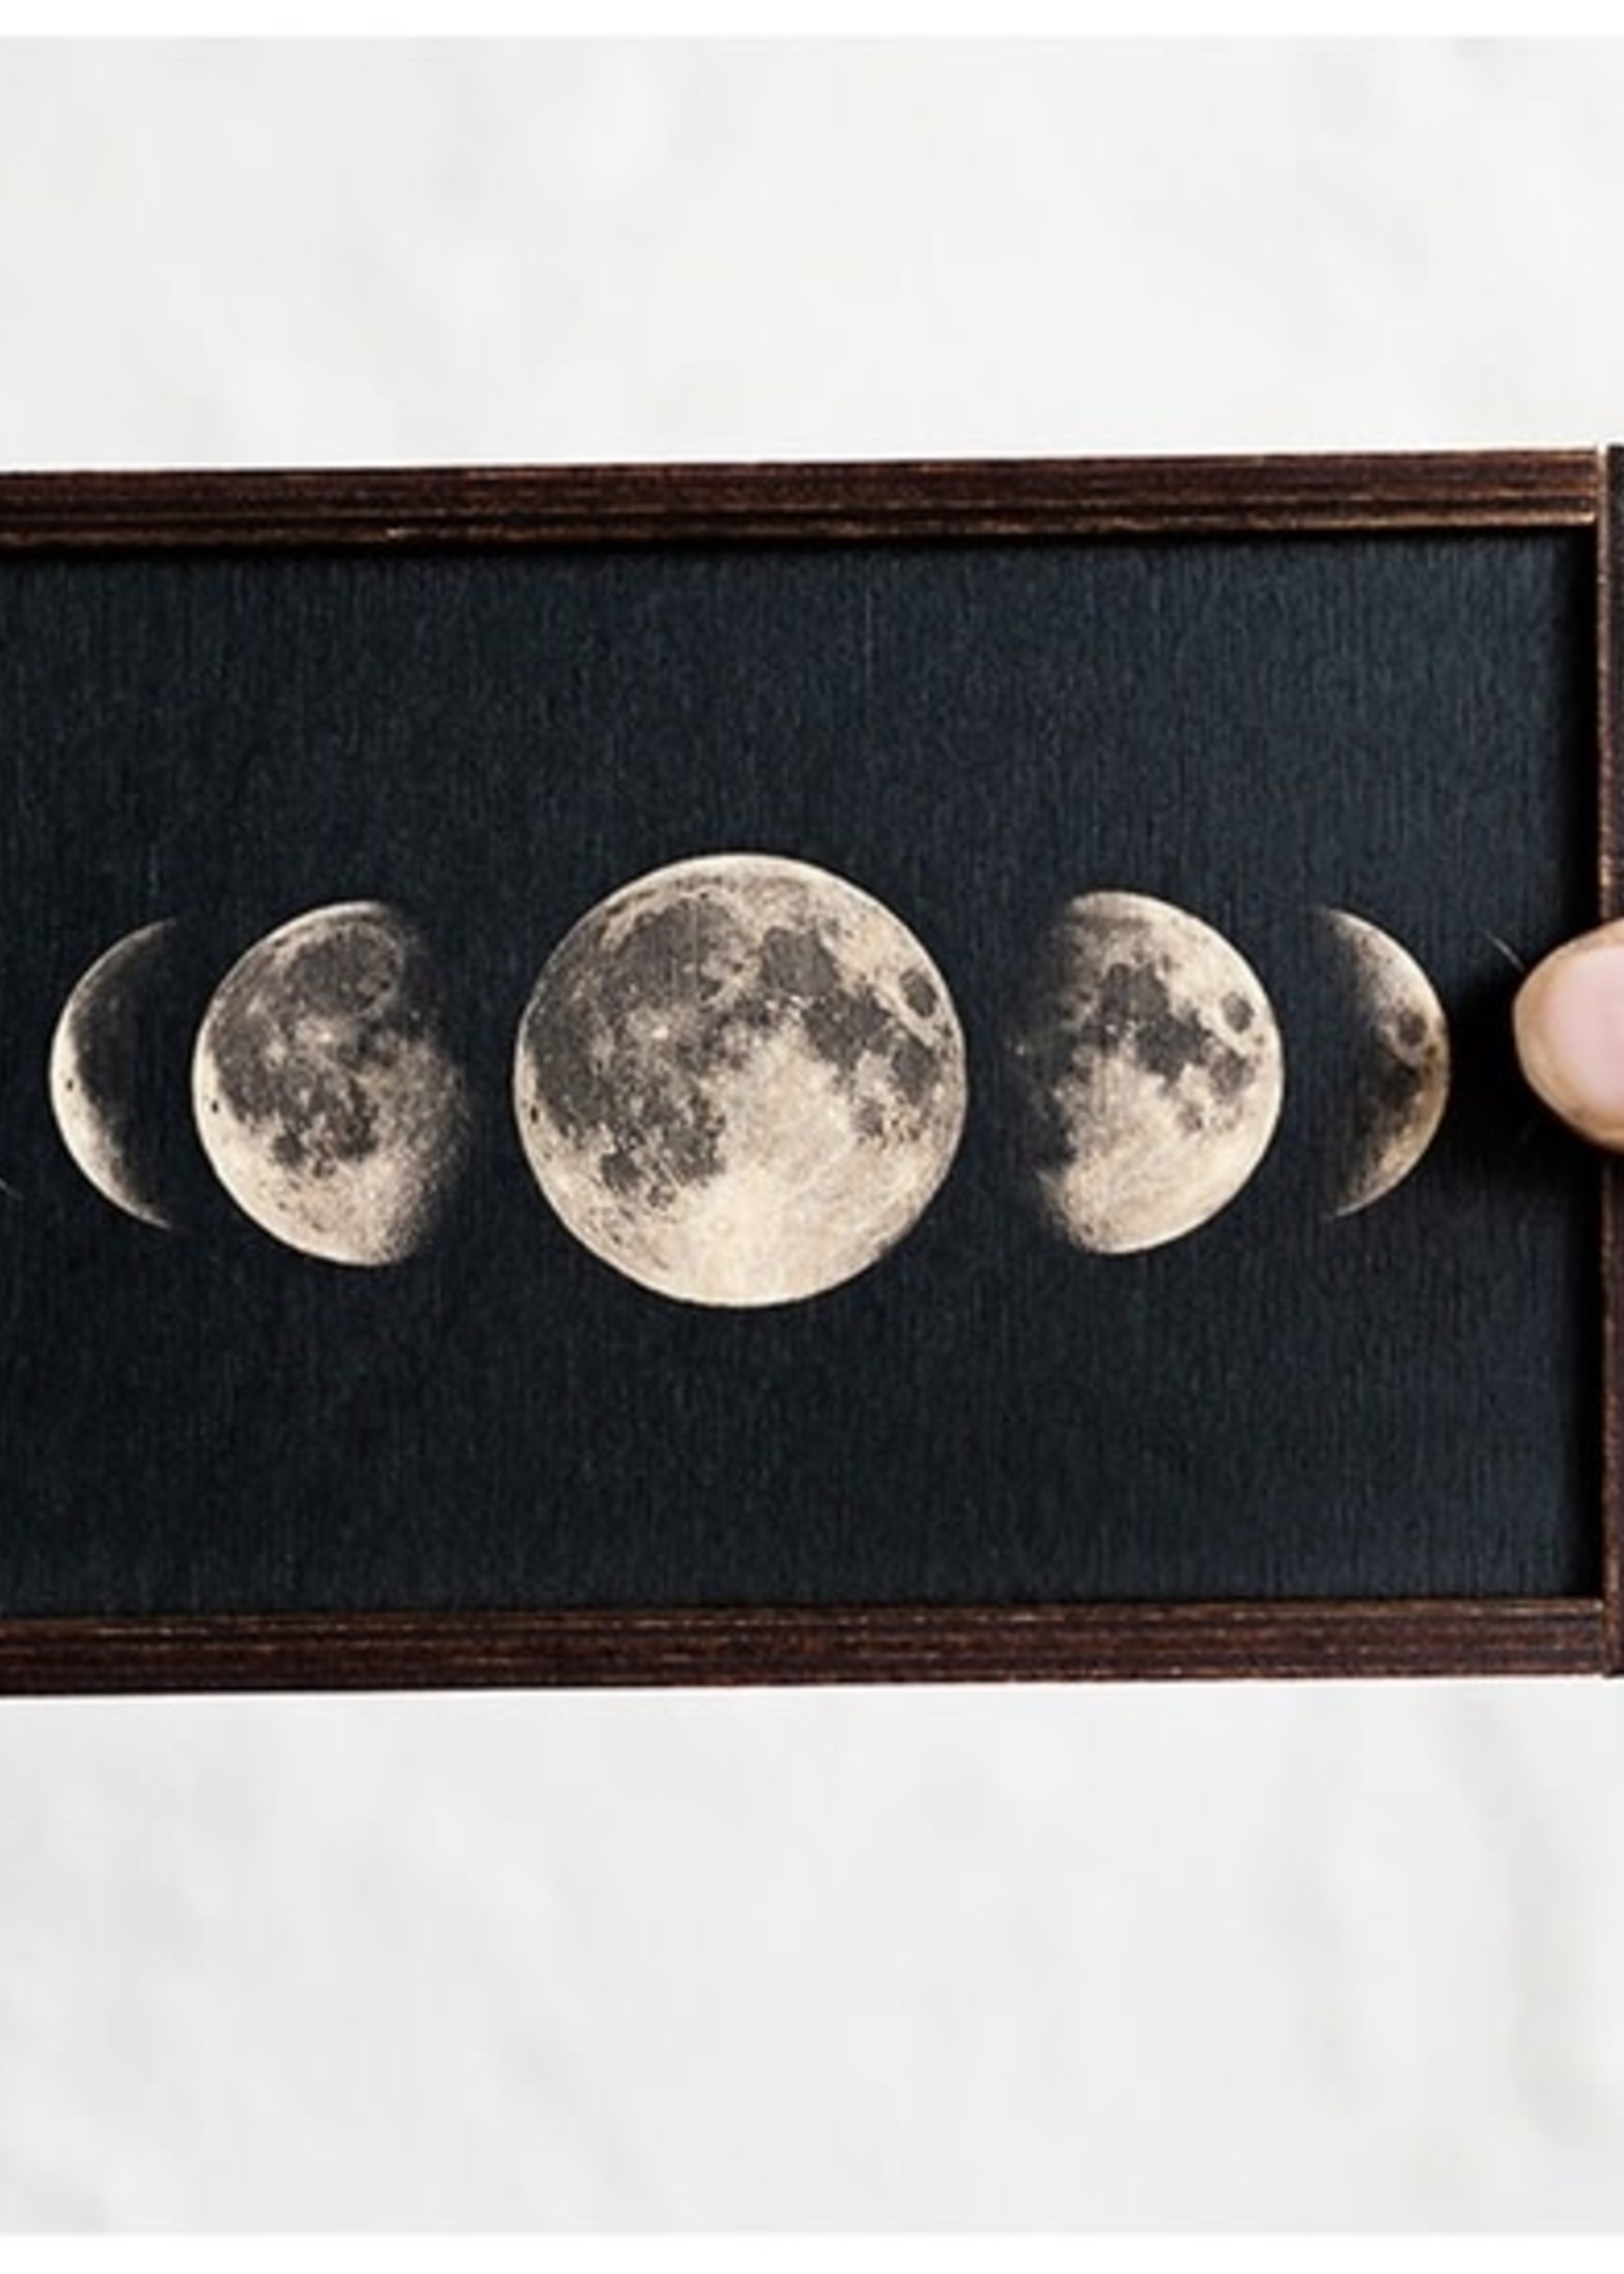 Most Amazing Boxes: Moon Phases 4x6